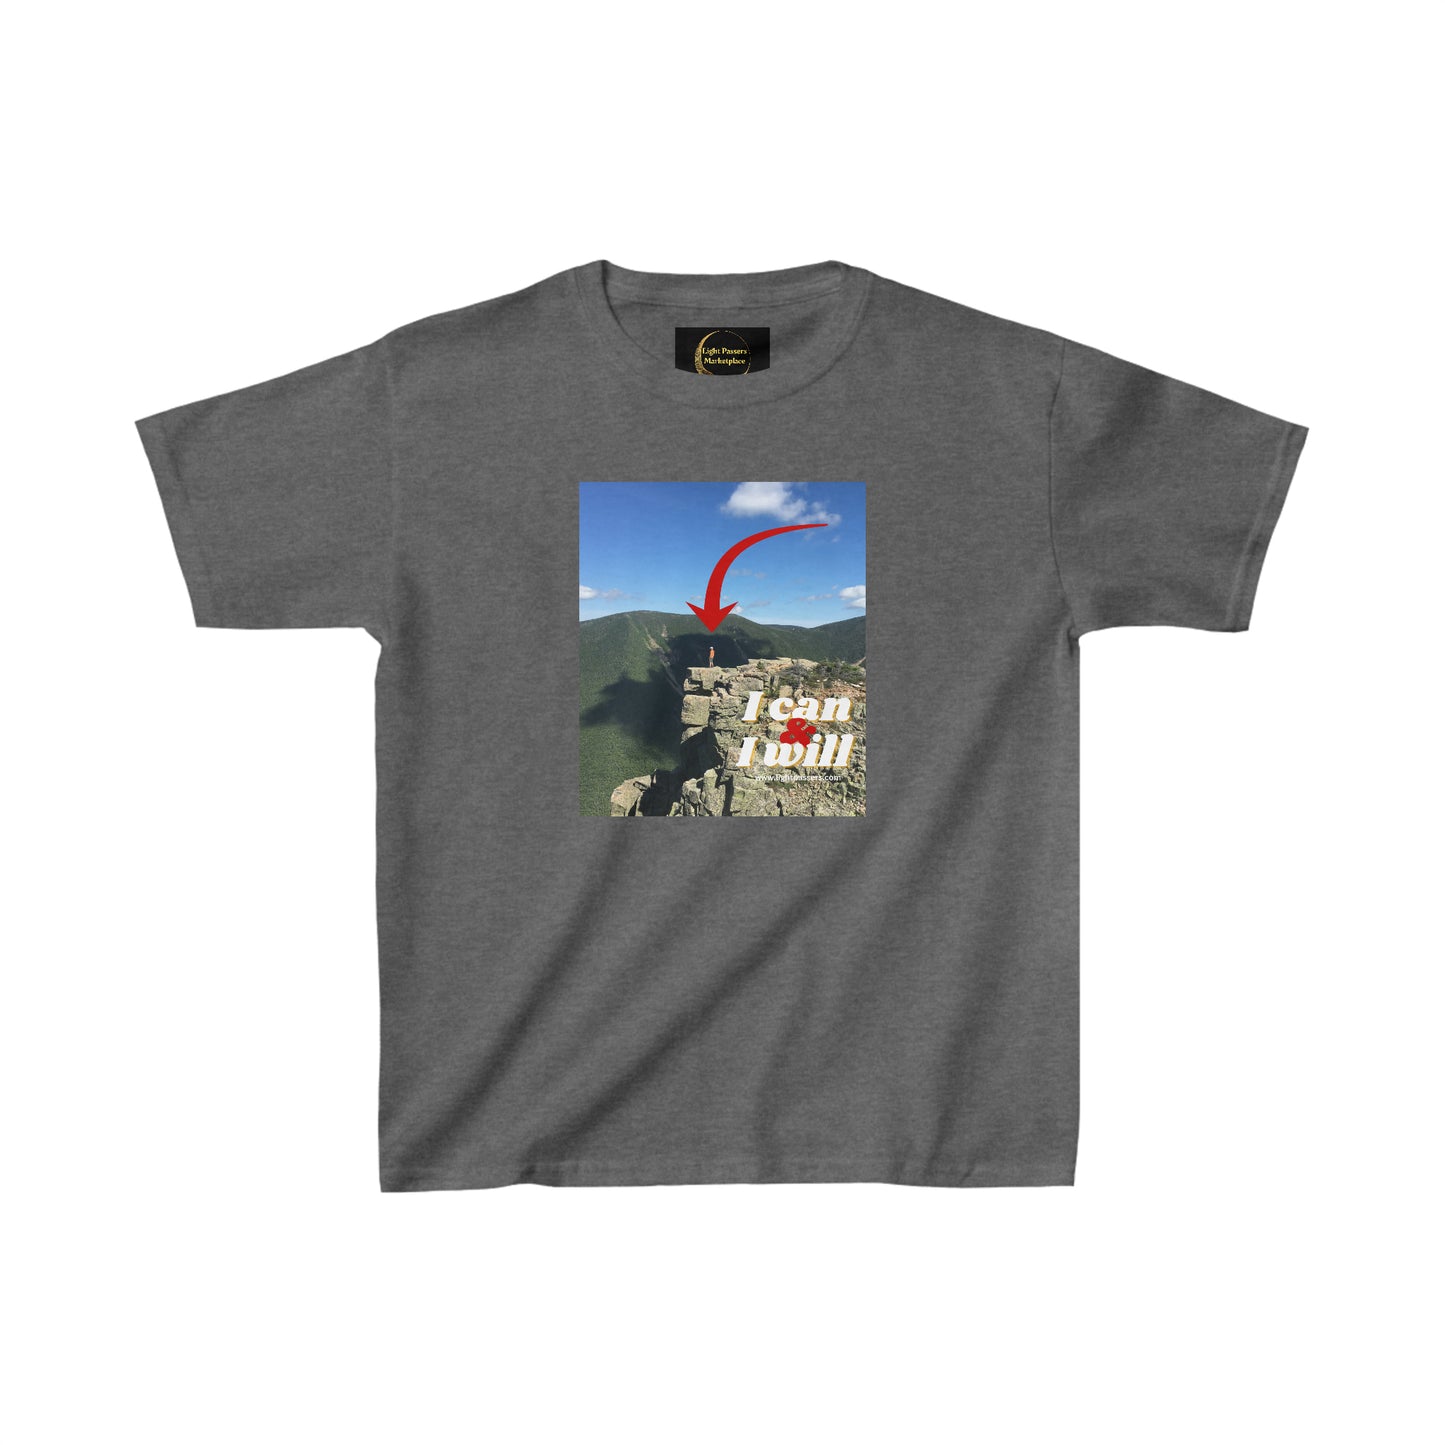 A youth t-shirt featuring a mountain and red arrow design, perfect for everyday wear. Made of 100% cotton, with twill tape shoulders for durability and a curl-resistant collar. Ethically crafted with US cotton.